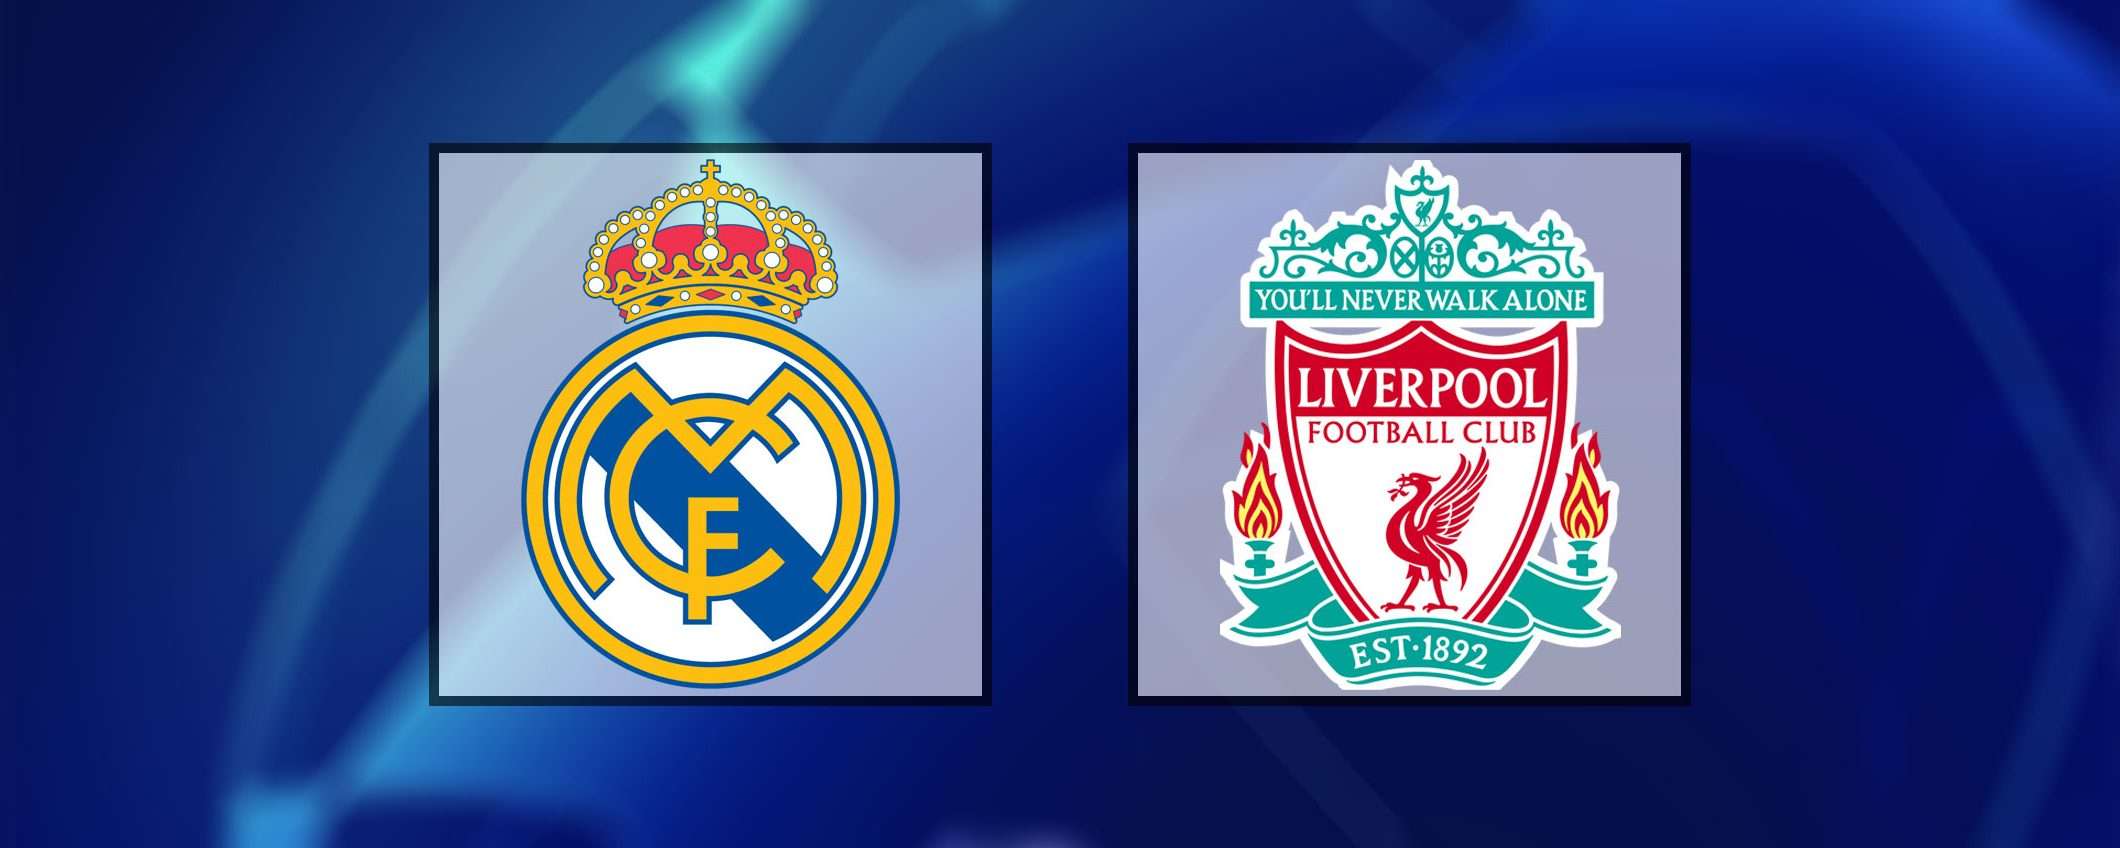 Come vedere Real Madrid-Liverpool in streaming